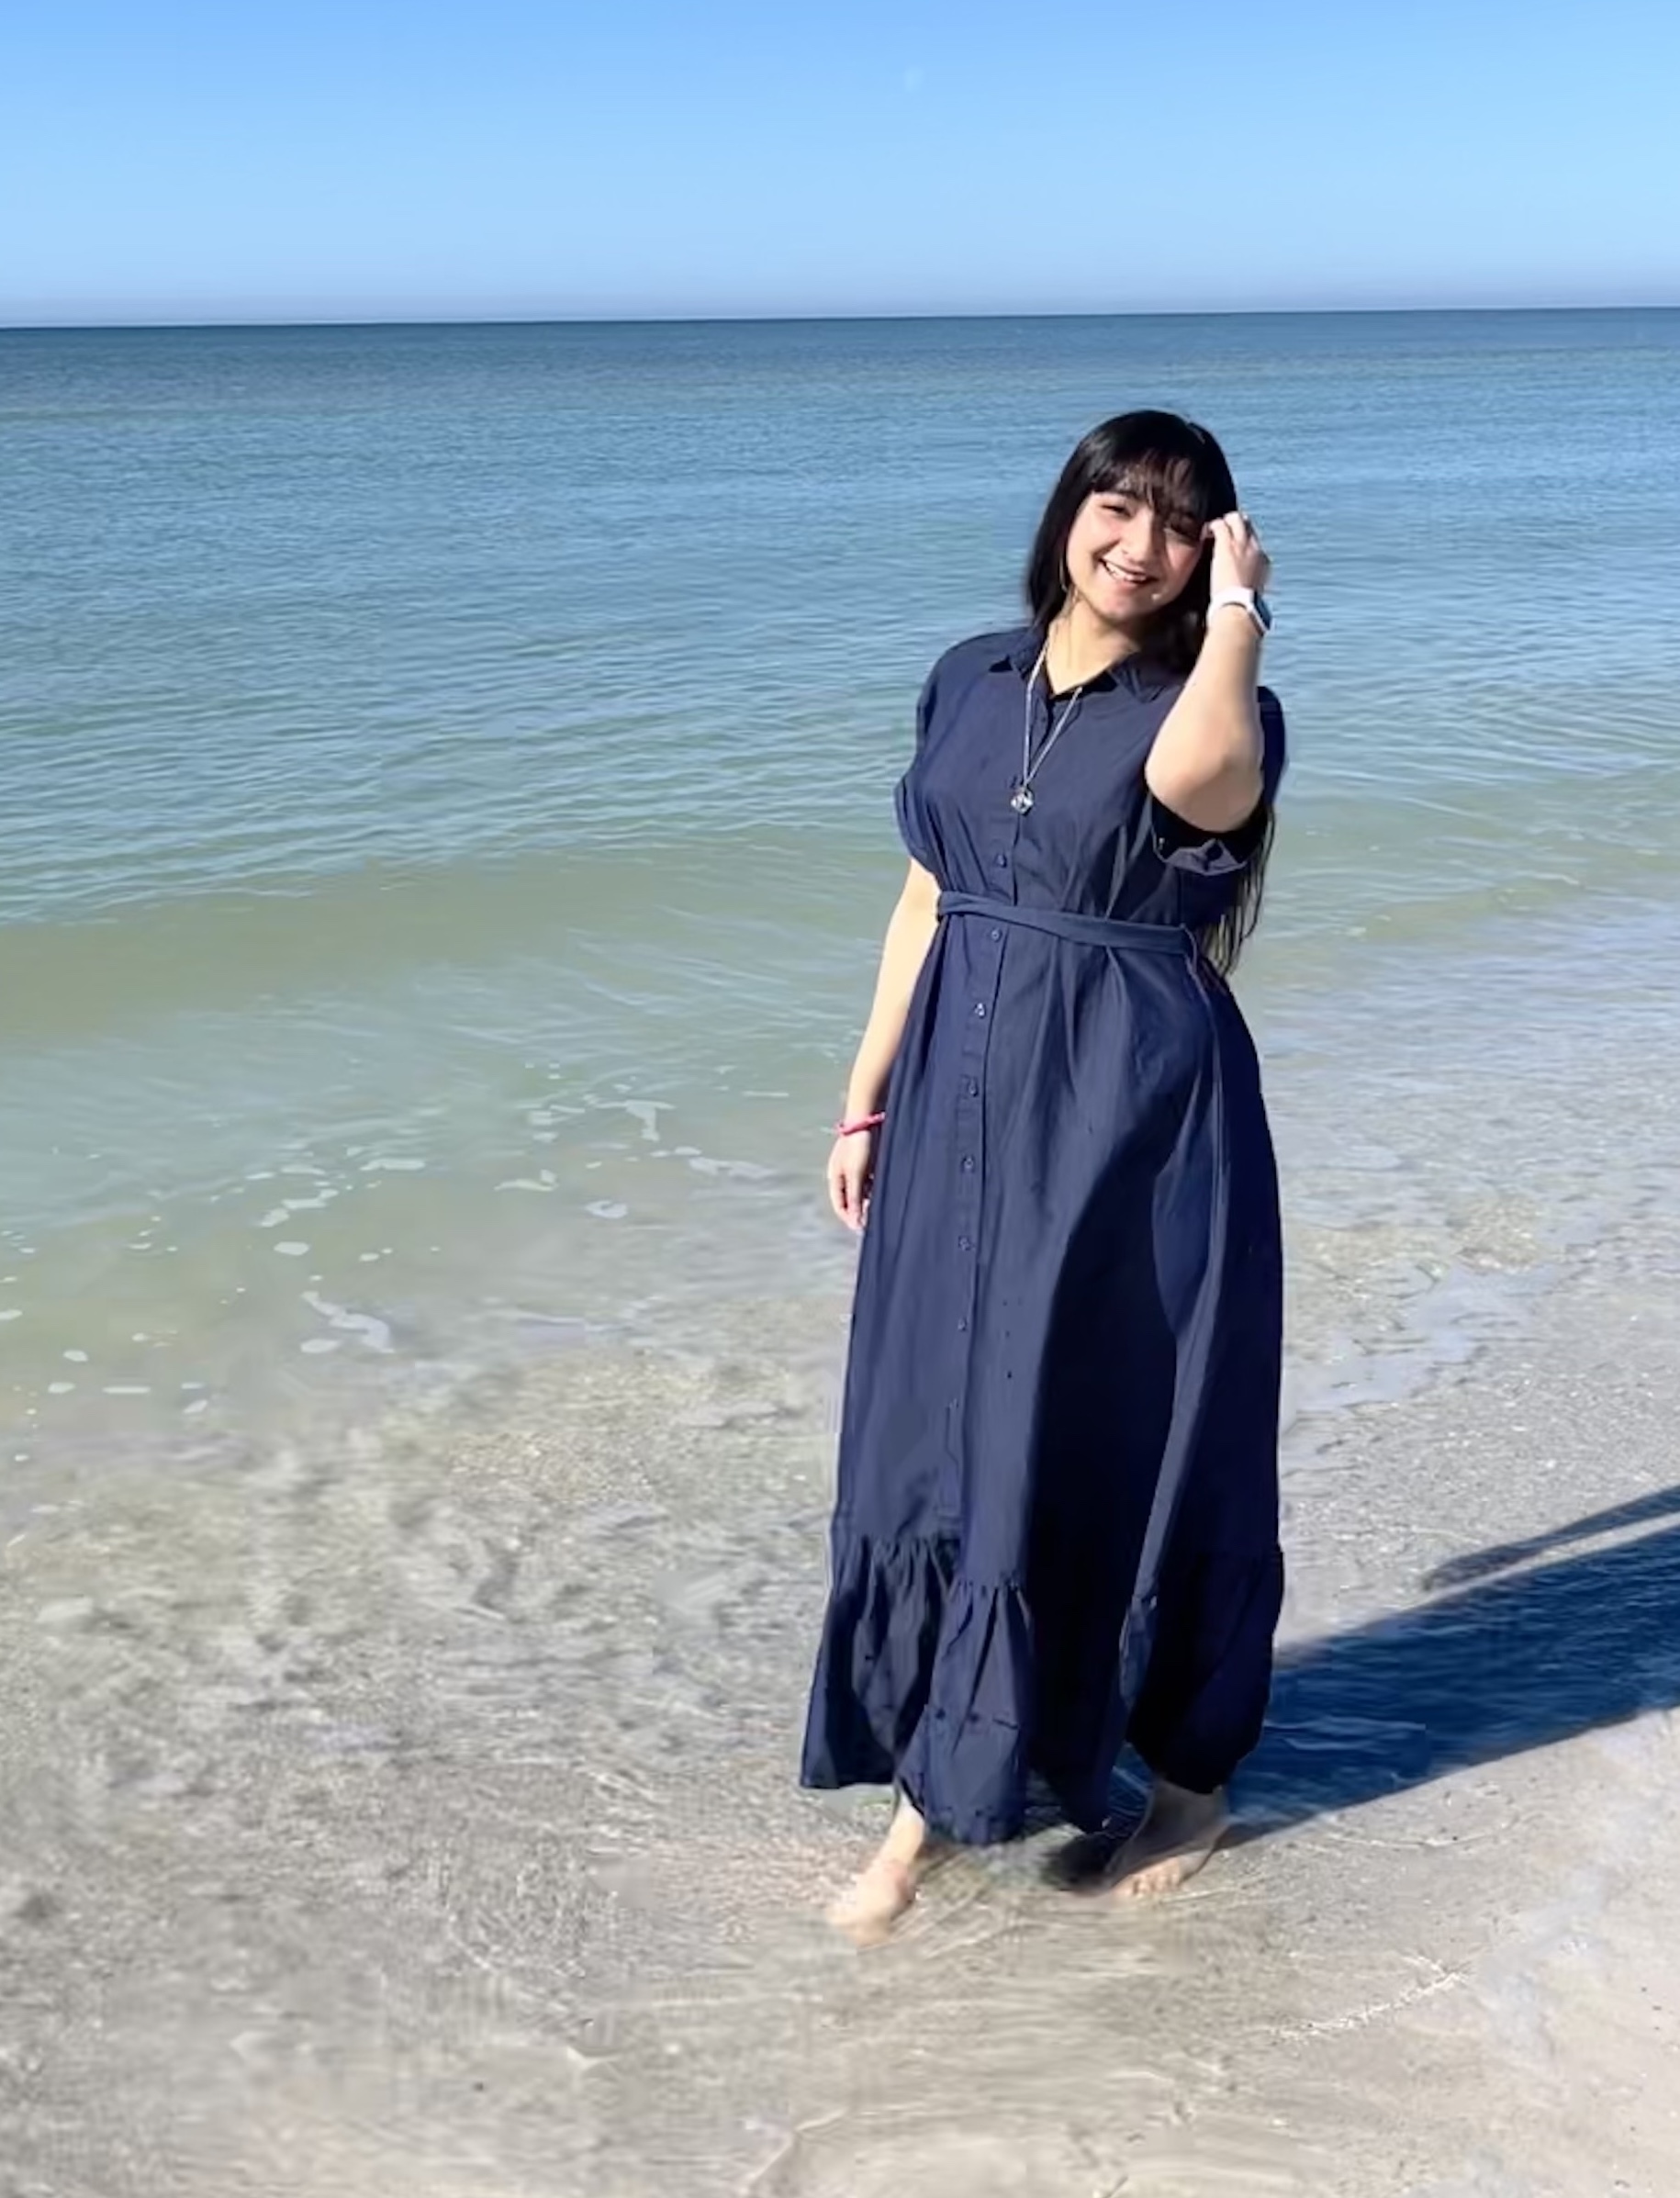 Mahnoor on the beach with her feet in the water